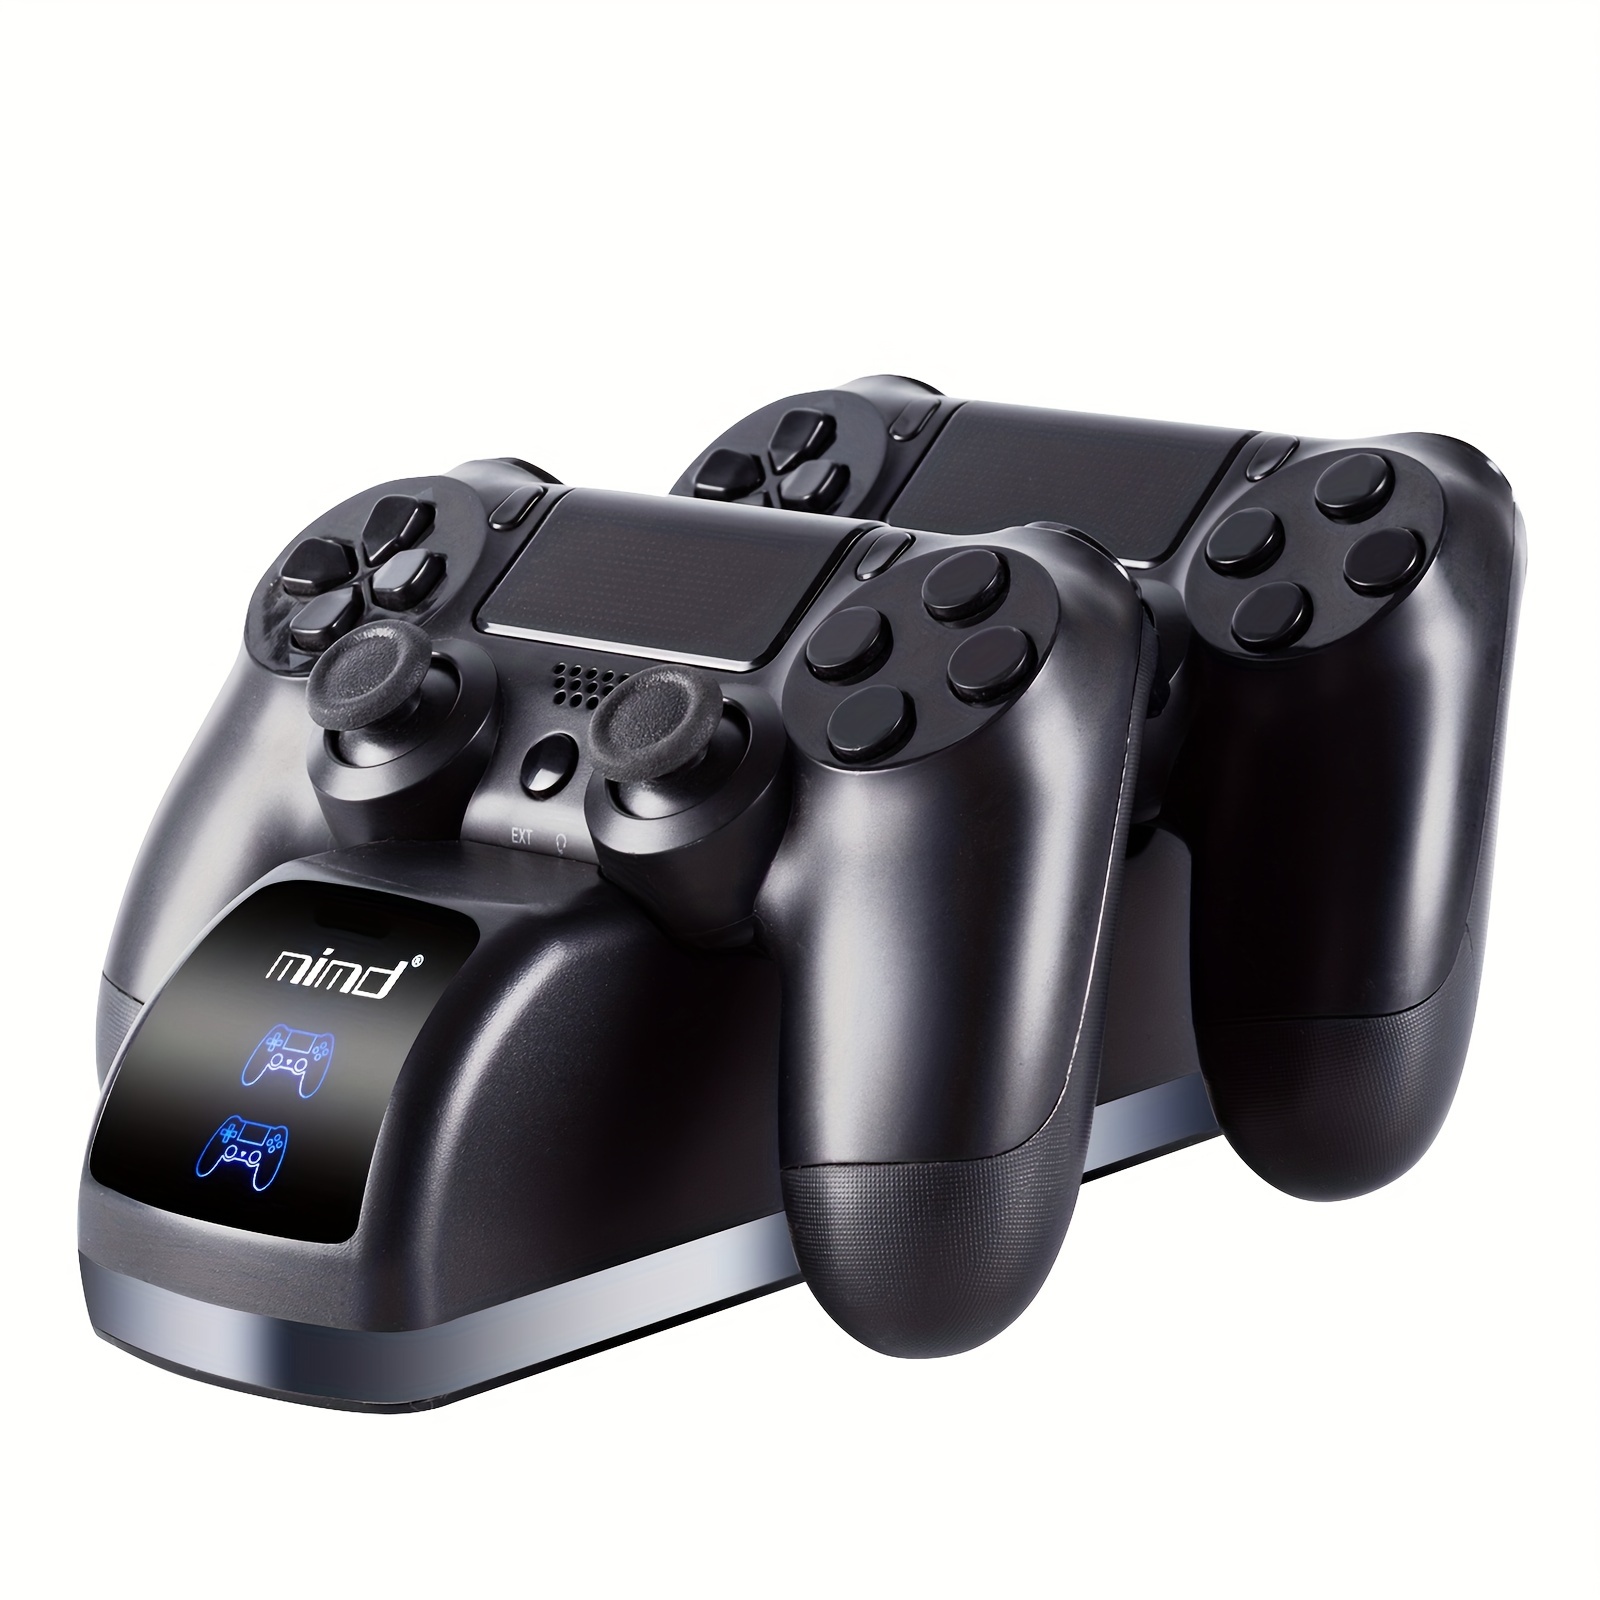 PS4 Controllers: Modern PS4 controllers for gaming lovers